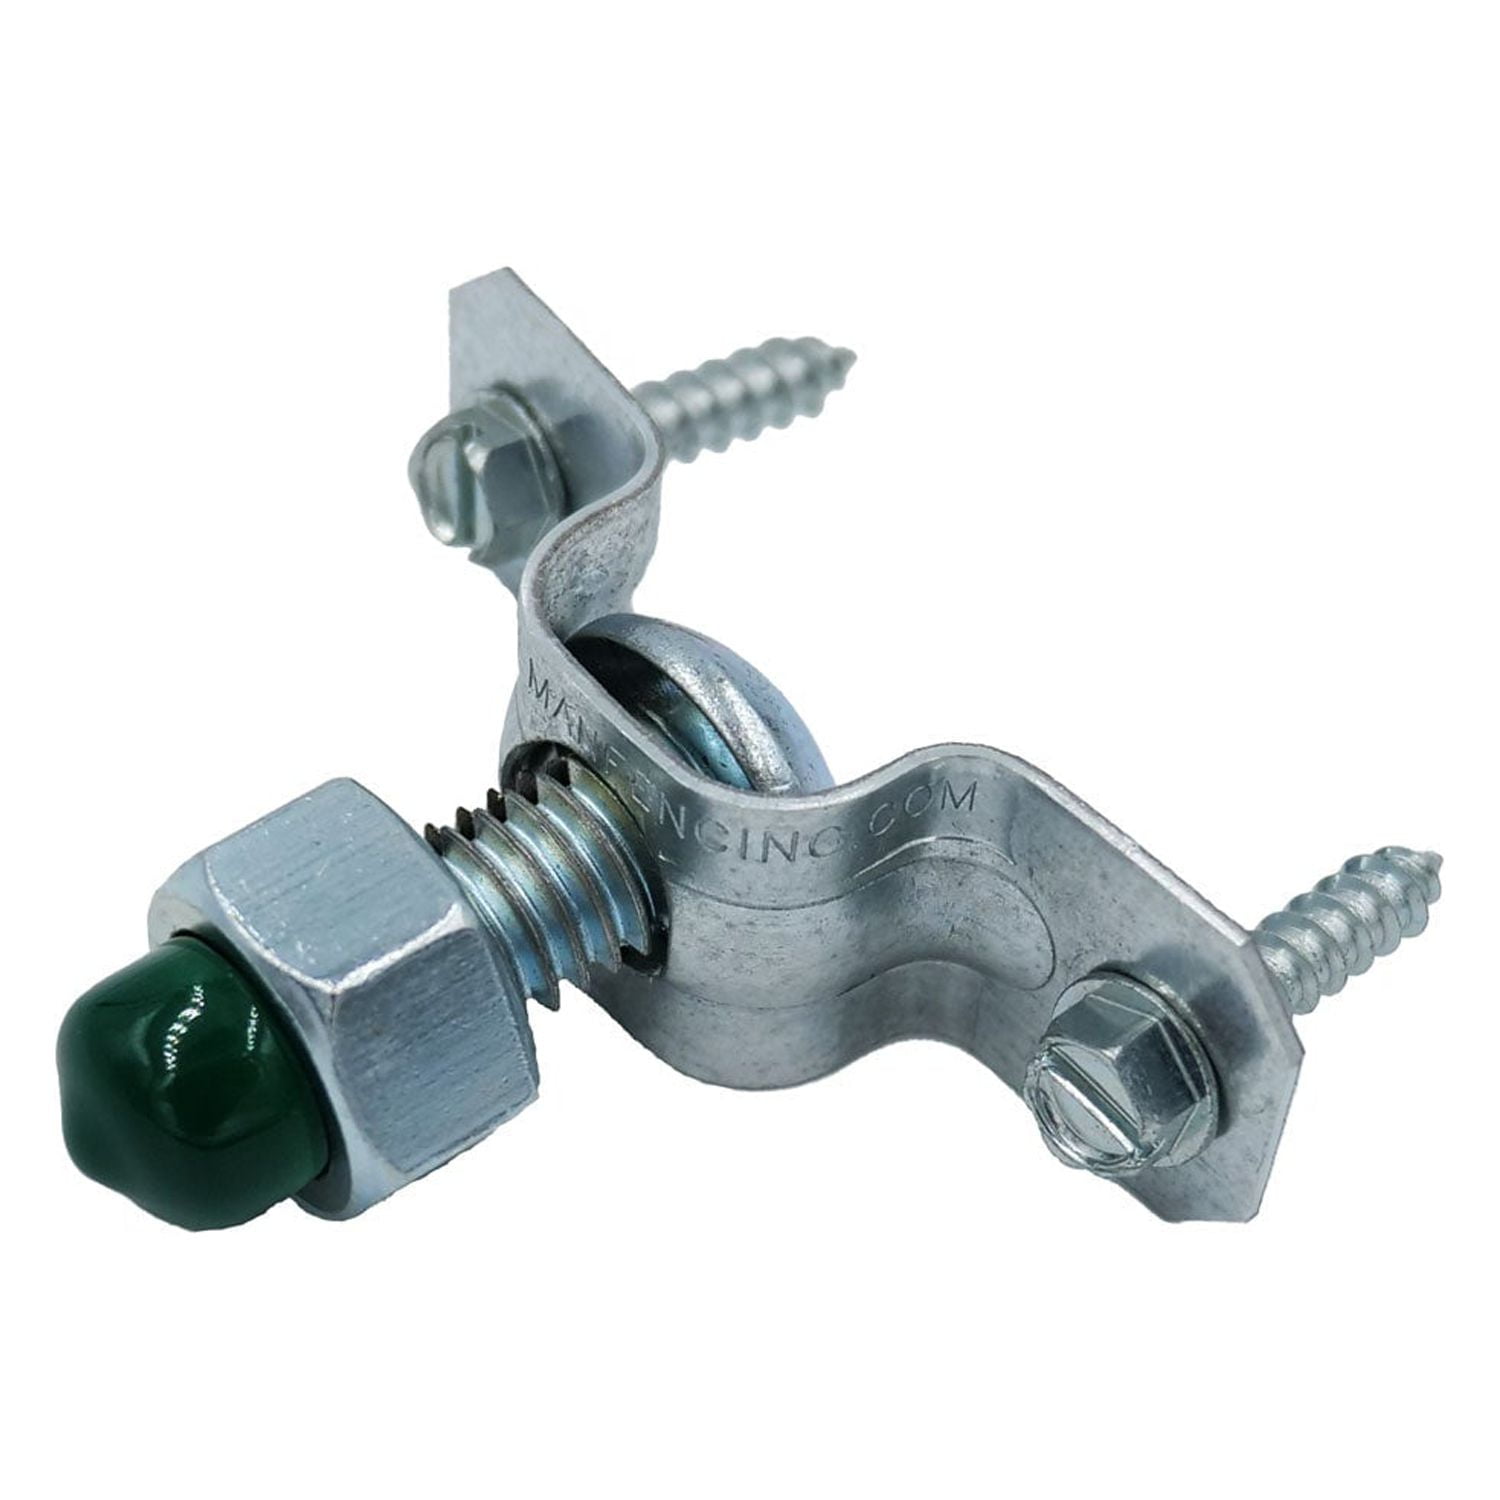 Ideal Greenie Insulated Wire Grounding Connector Green 100